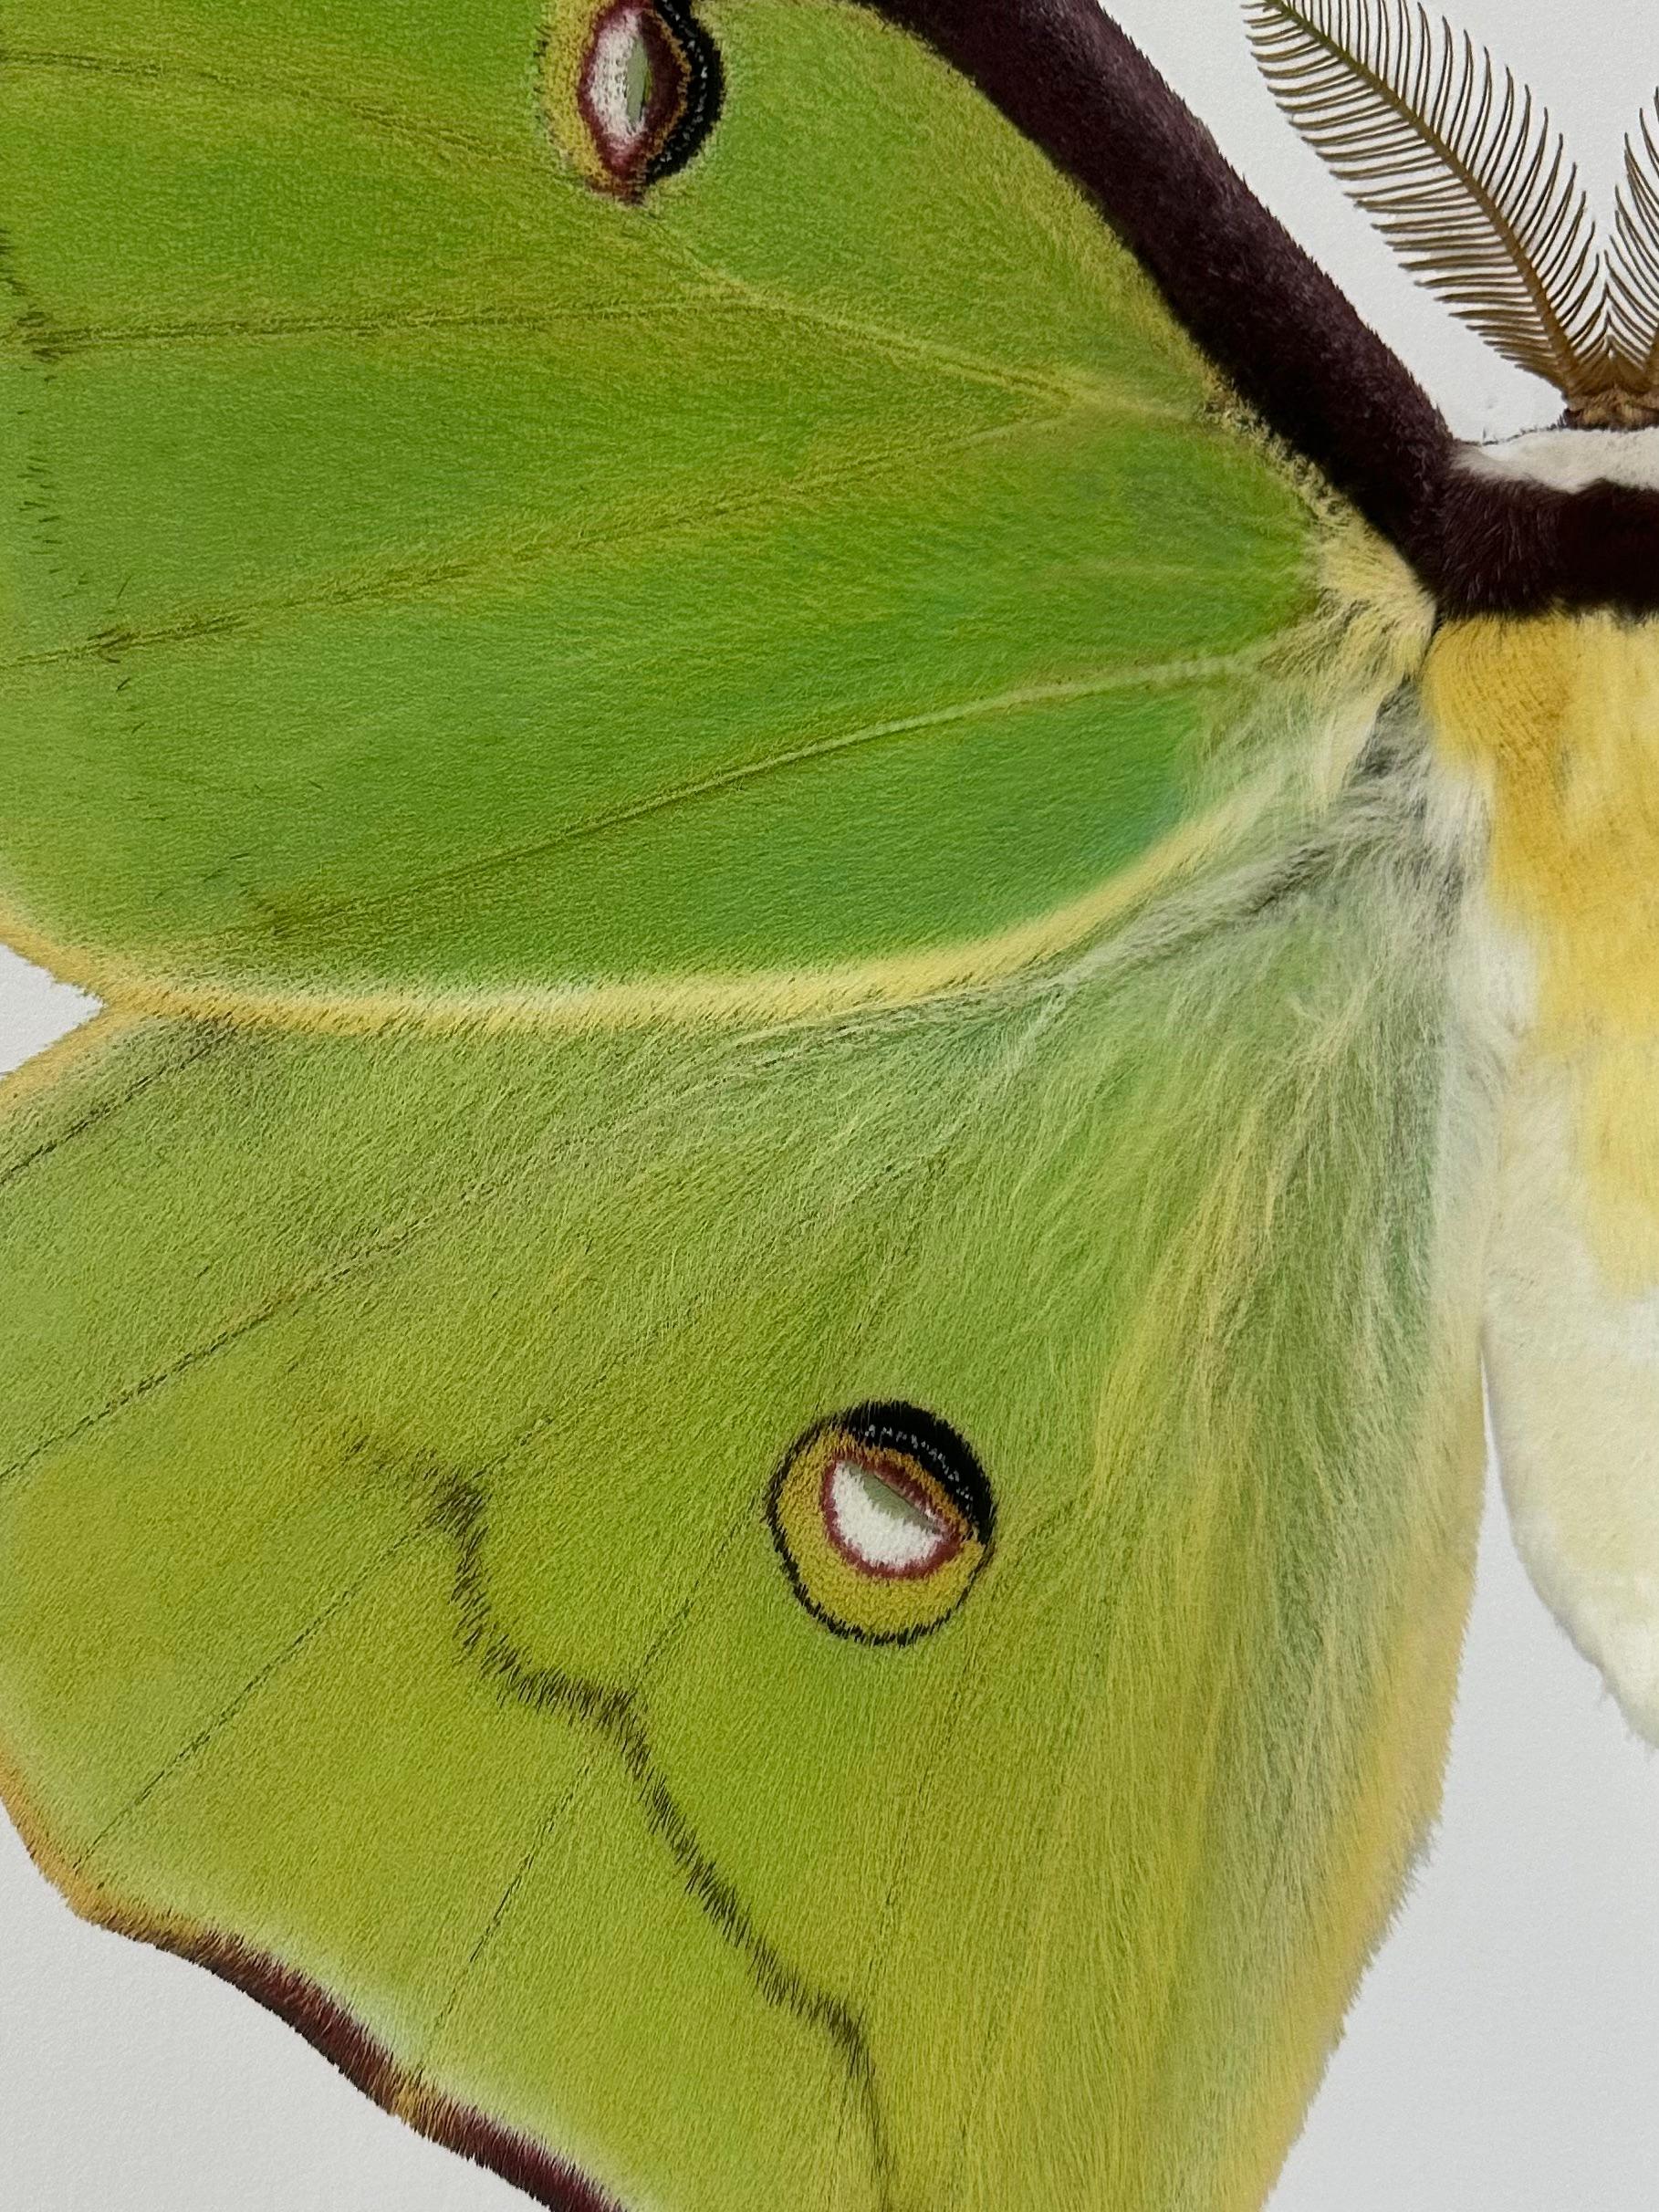 Actias Luna, Green, Yellow, Brown Moth Insect Nature Photograph For Sale 1